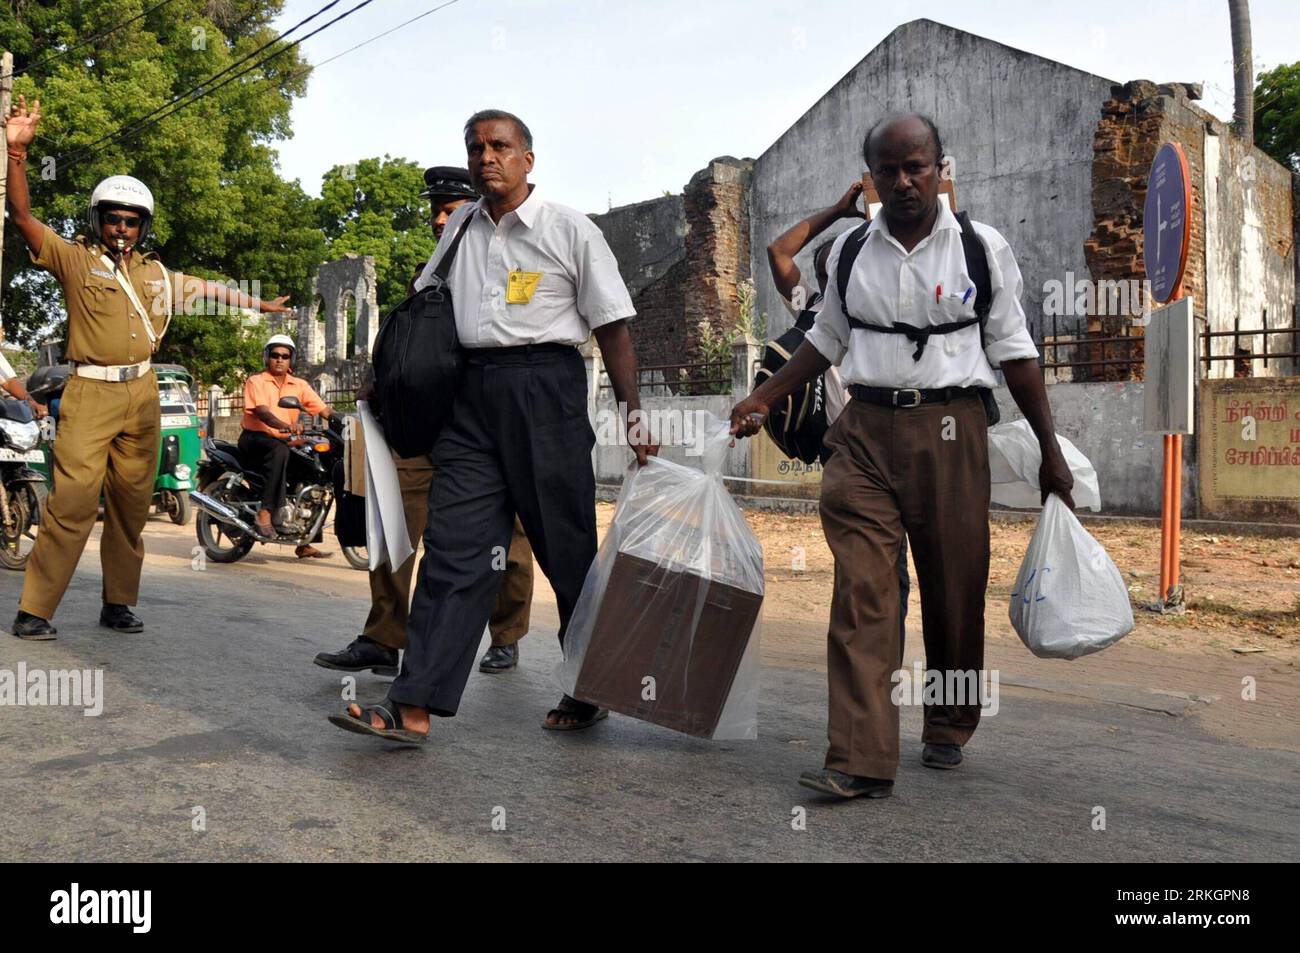 Bildnummer: 55611597  Datum: 23.07.2011  Copyright: imago/Xinhua (110723) -- JAFFNA (SRI LANKA), July 23, 2011 (Xinhua) -- Sri Lankan election officials carry ballot boxes to be transferred to a main counting center in Jaffna on July 23, 2011. Saturday s polls for 65 administrative bodies, including 20 in the districts of Jaffna, Kilinochchi and Mullaittivu where fighting raged till early 2009, ended peacefully despite of fears that violence may break out. (Xinhua/Gayan Sameera)(zx) SRI LANKA-WAR ZONE-POLLING PUBLICATIONxNOTxINxCHN Gesellschaft Politik Wahl Kommunalwahl Auszählung Wahlurne pre Stock Photo